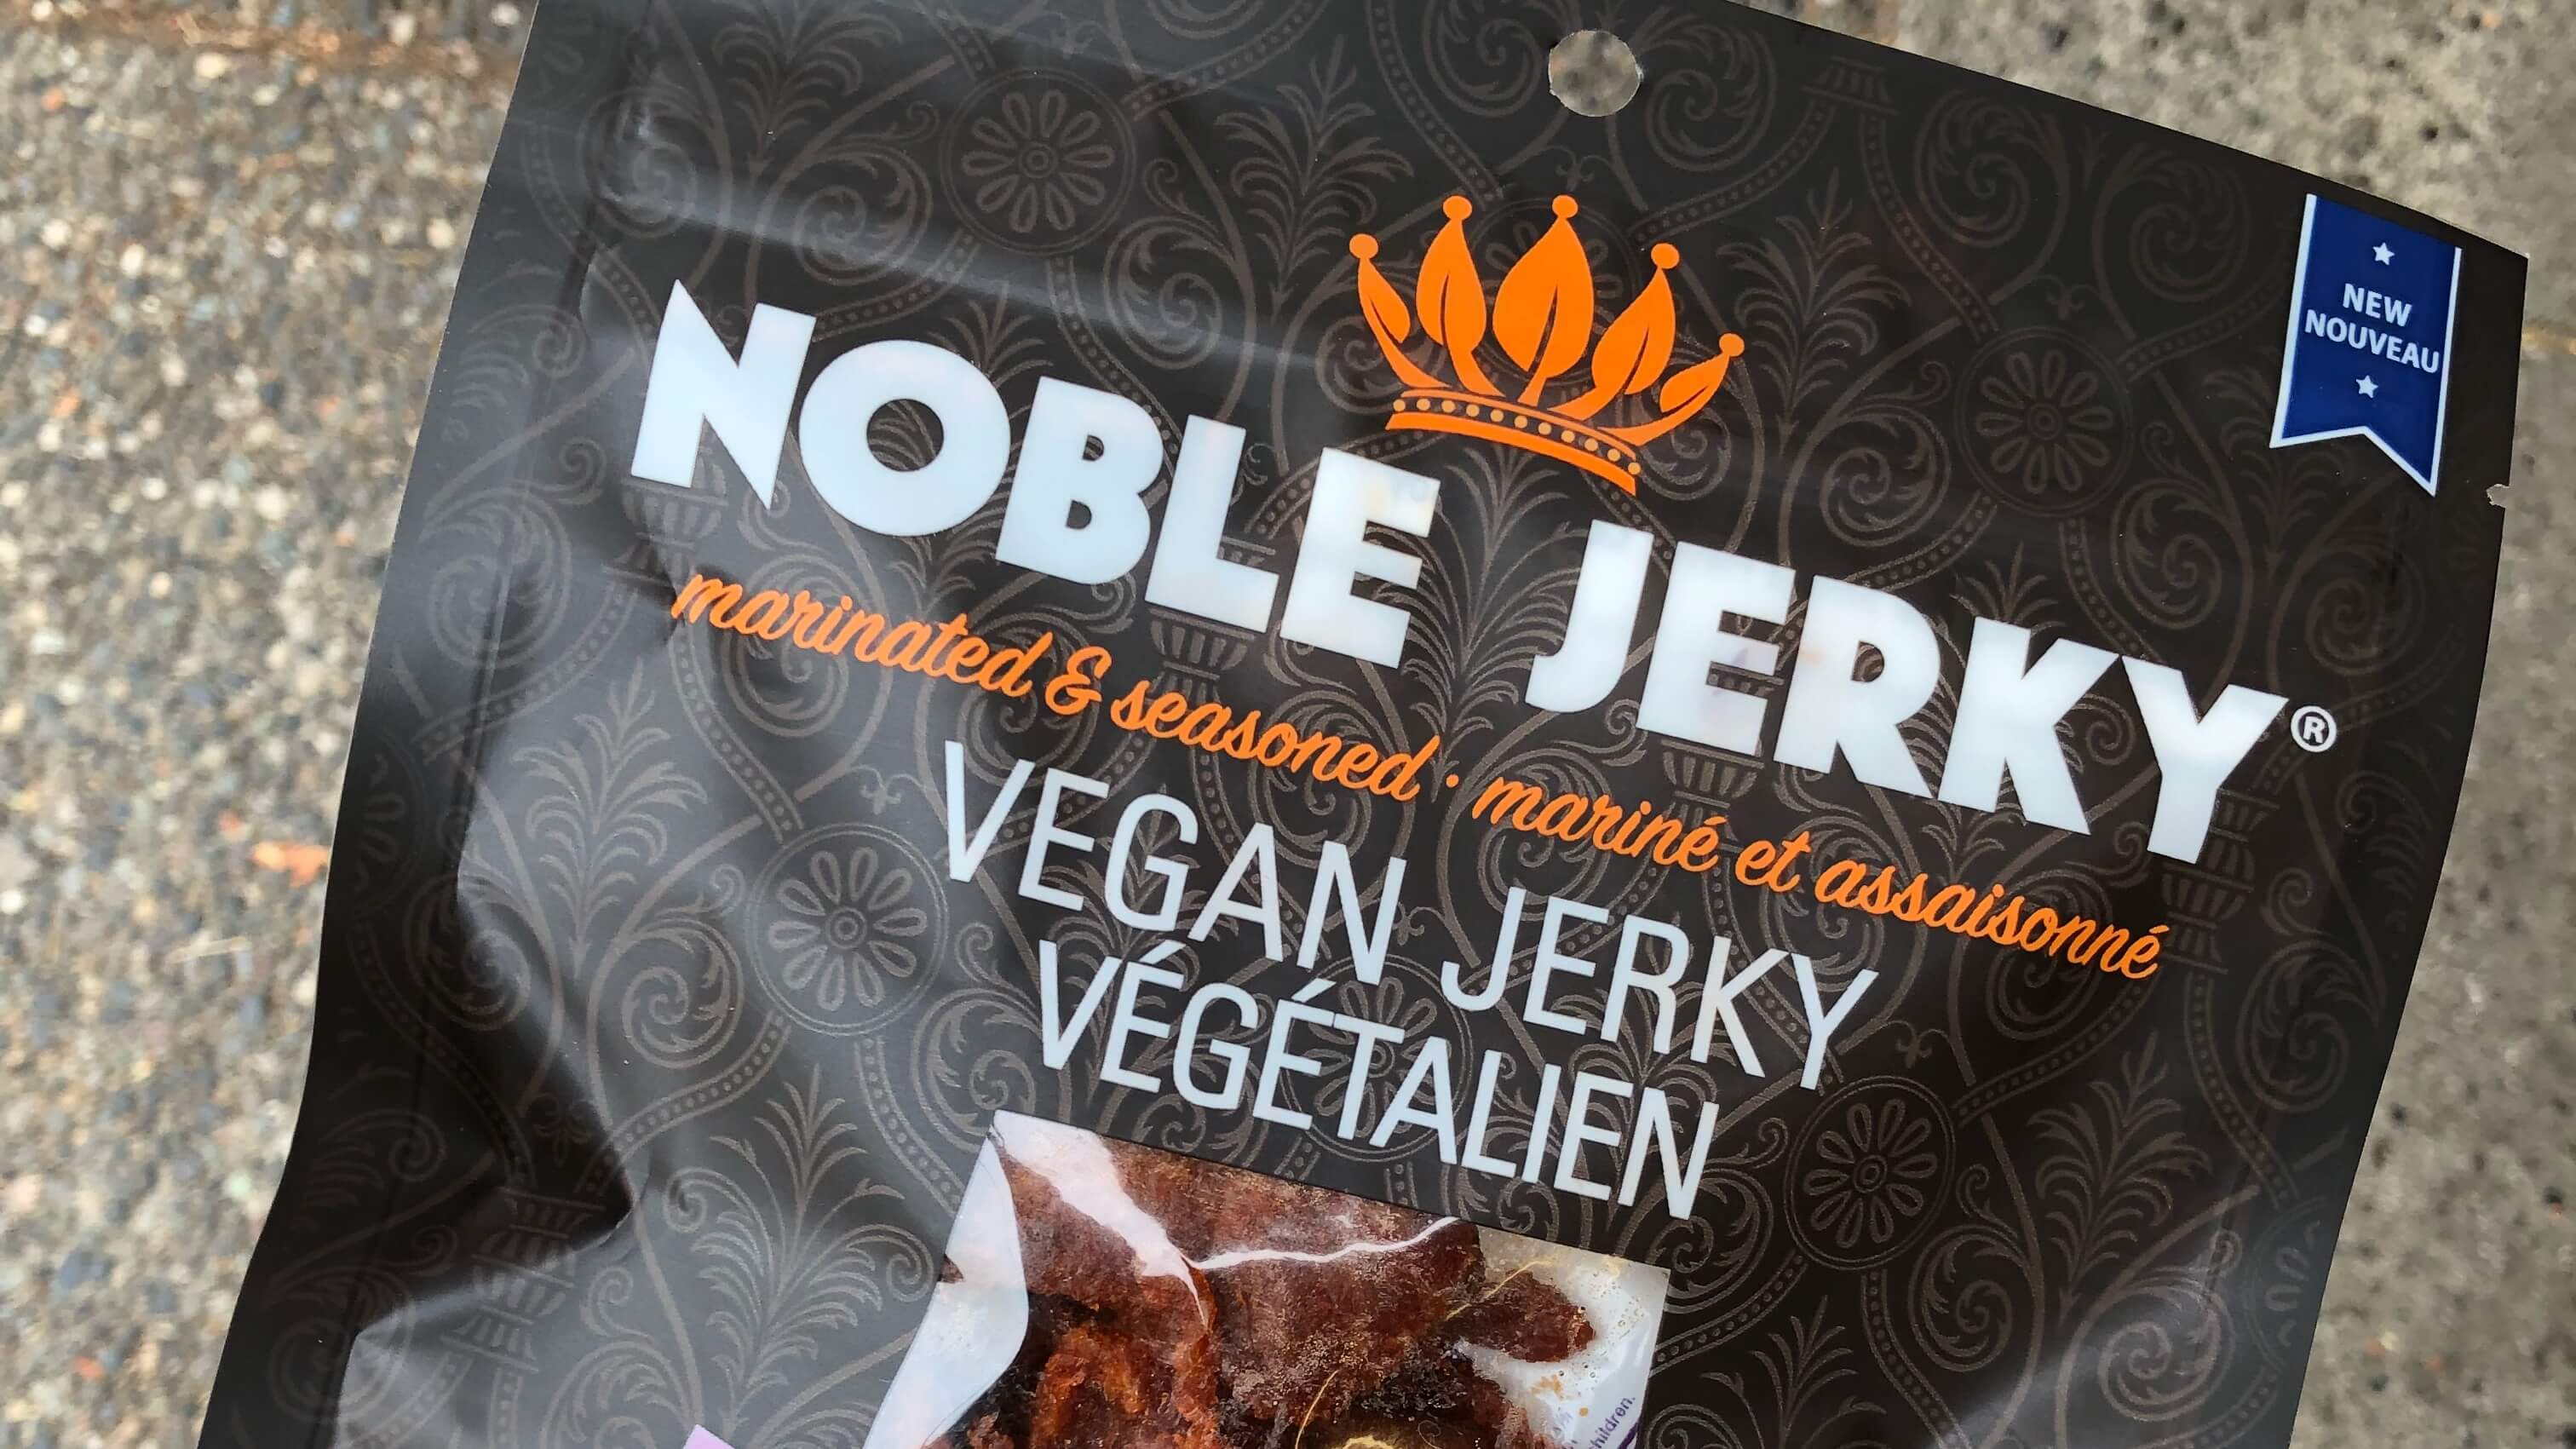 NOBLE Vegan Jerky Outsells All Dried Meat on Amazon